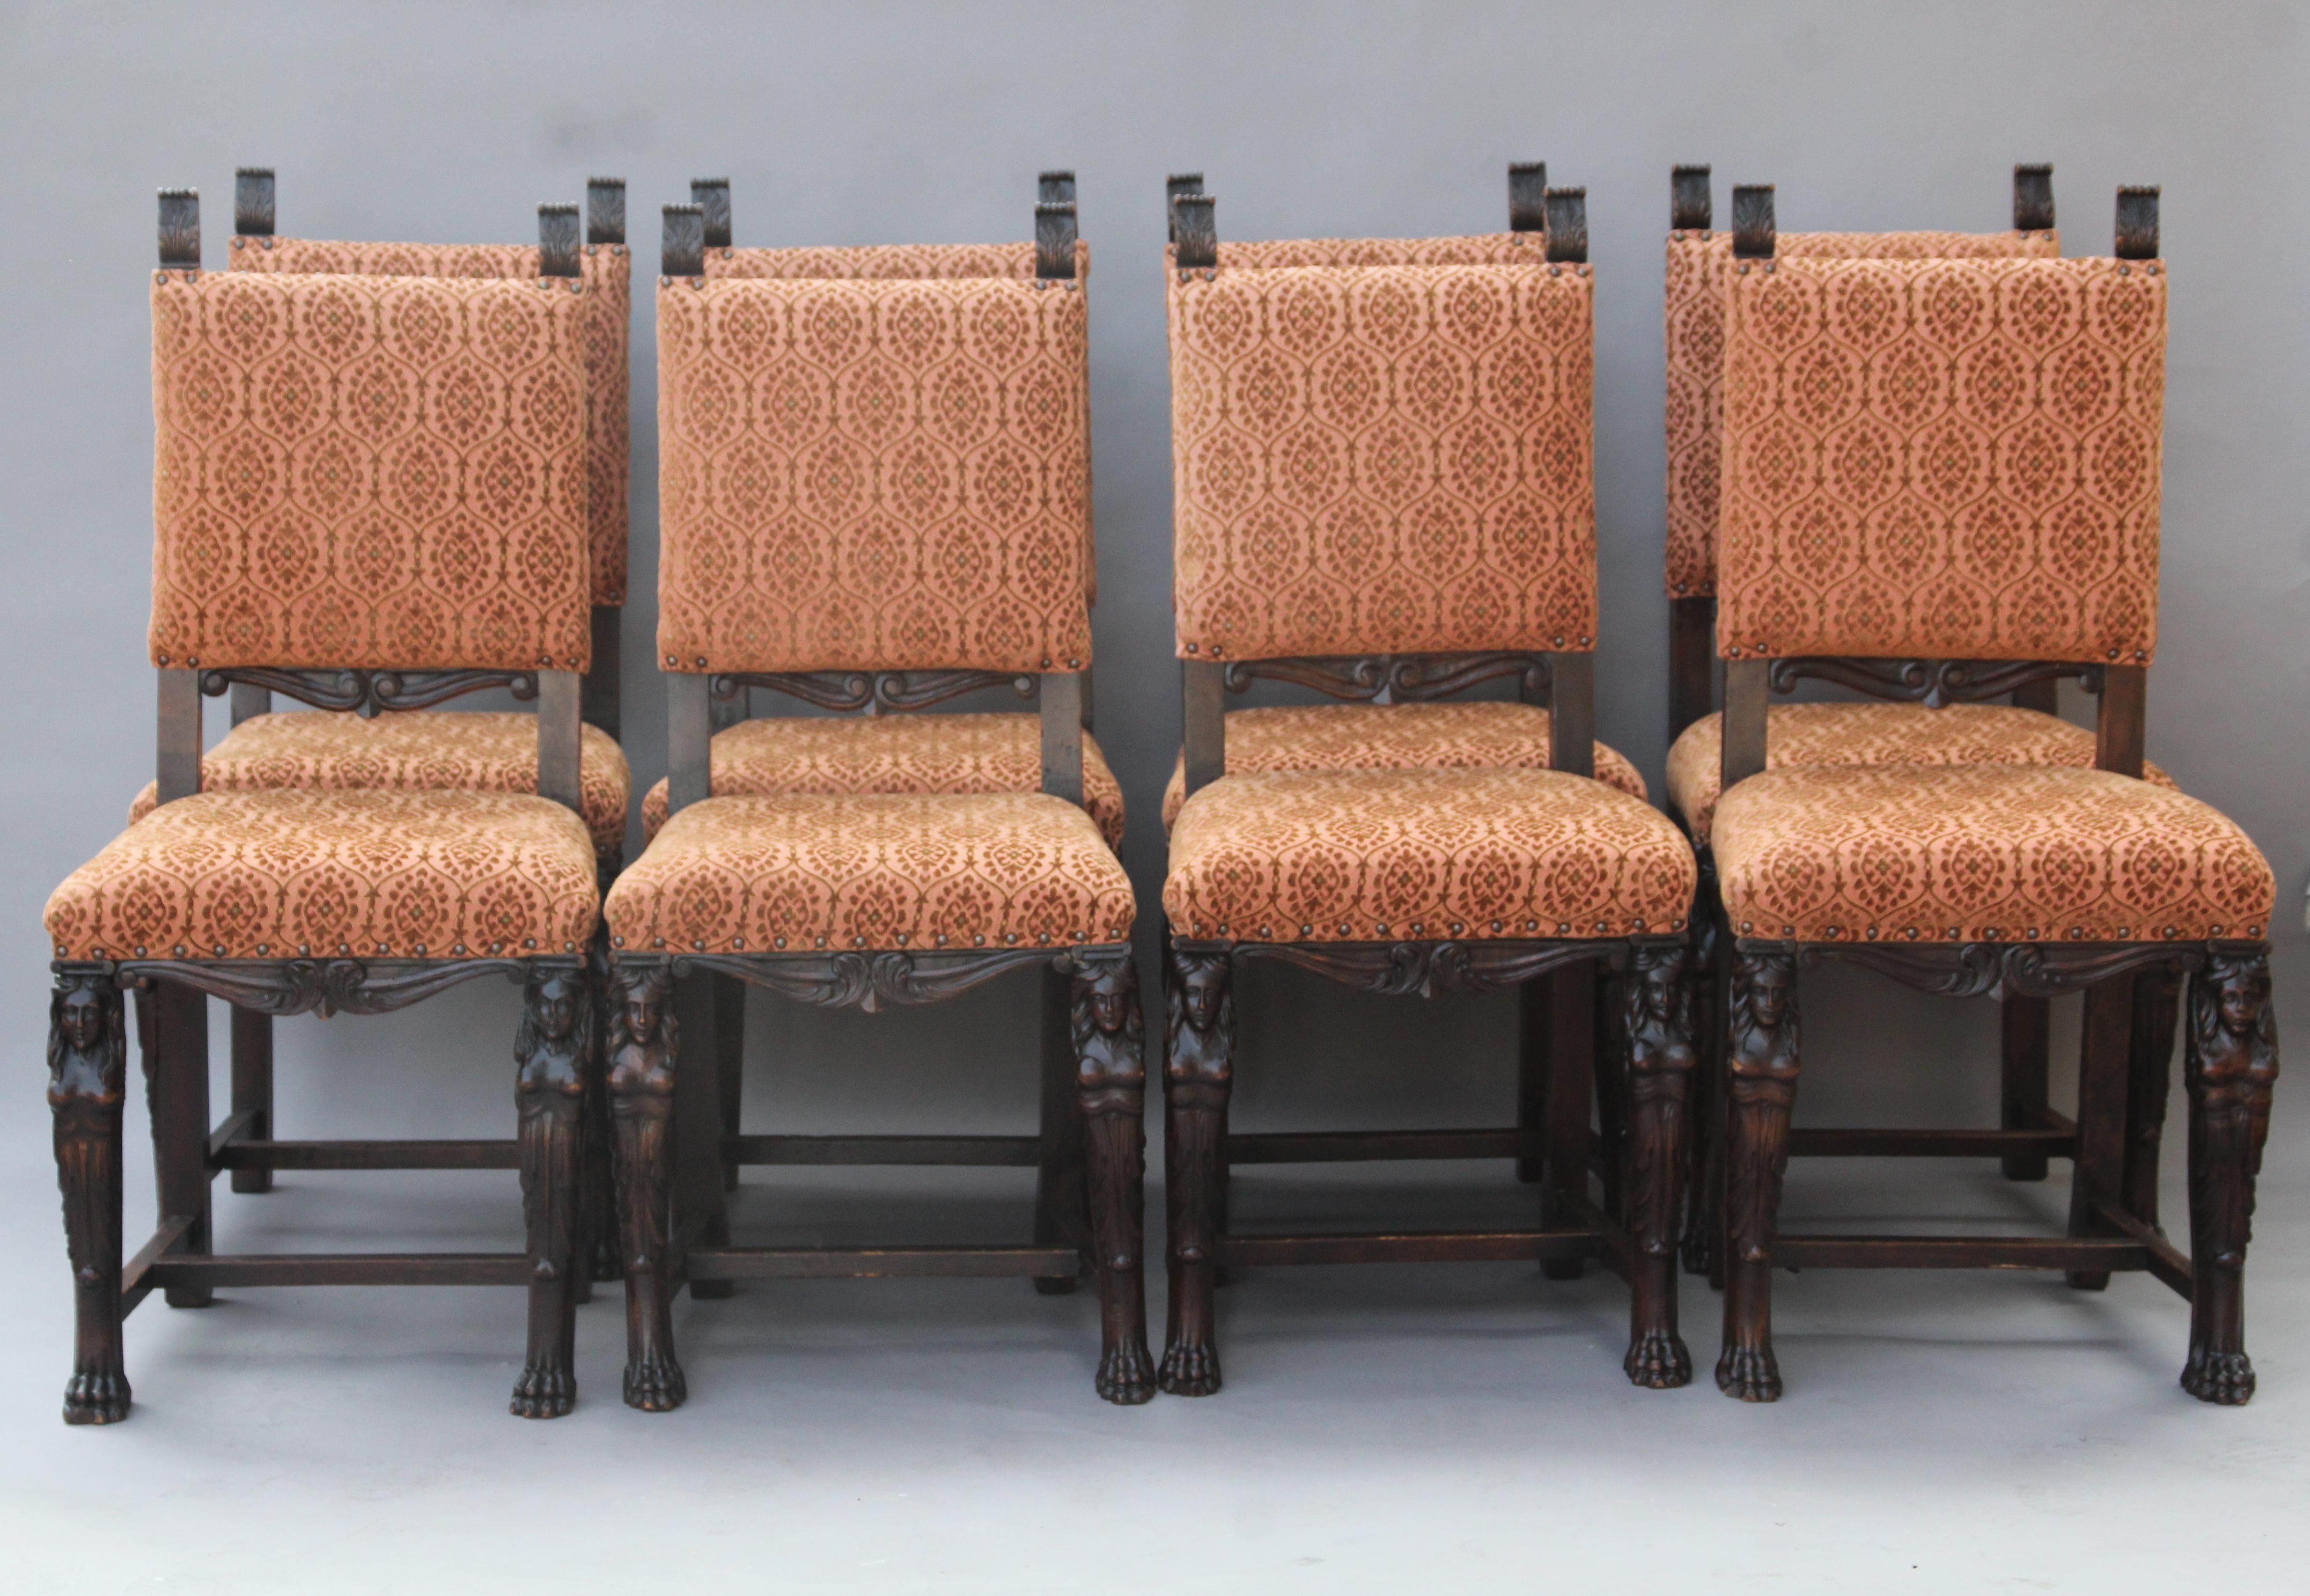 Set of eight Spanish Revival chairs, circa 1920s.